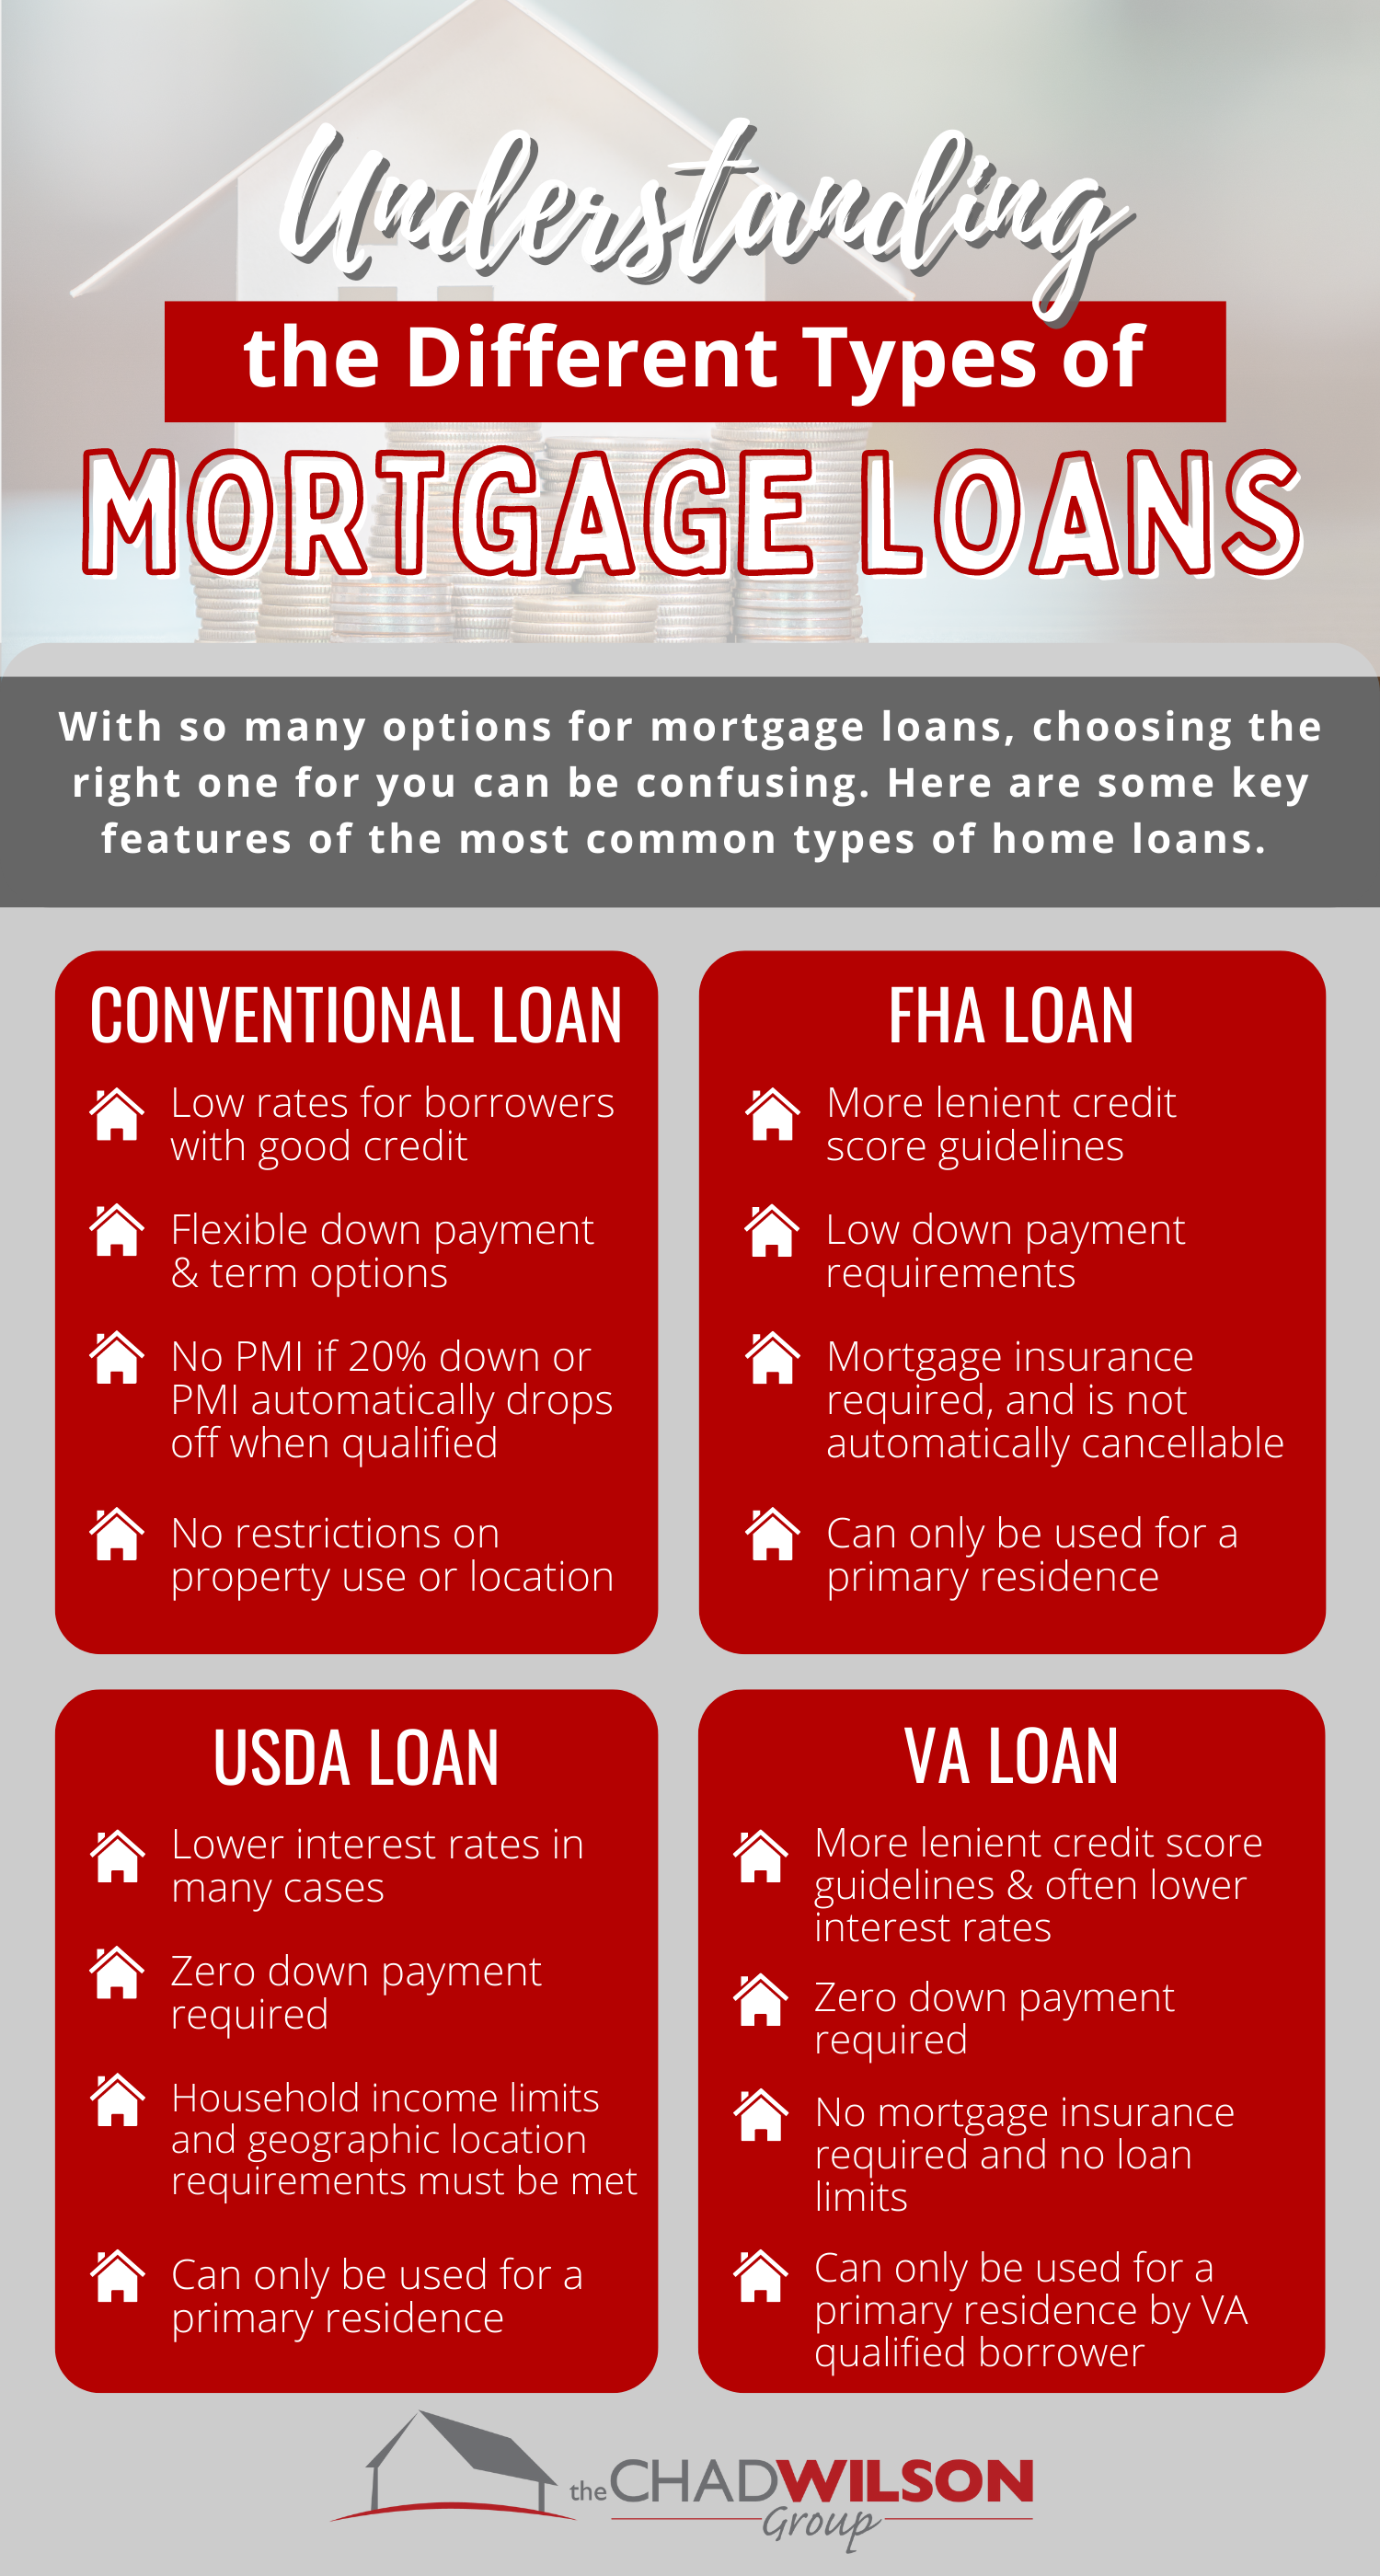 understanding-the-different-types-of-mortgage-loans-infographic